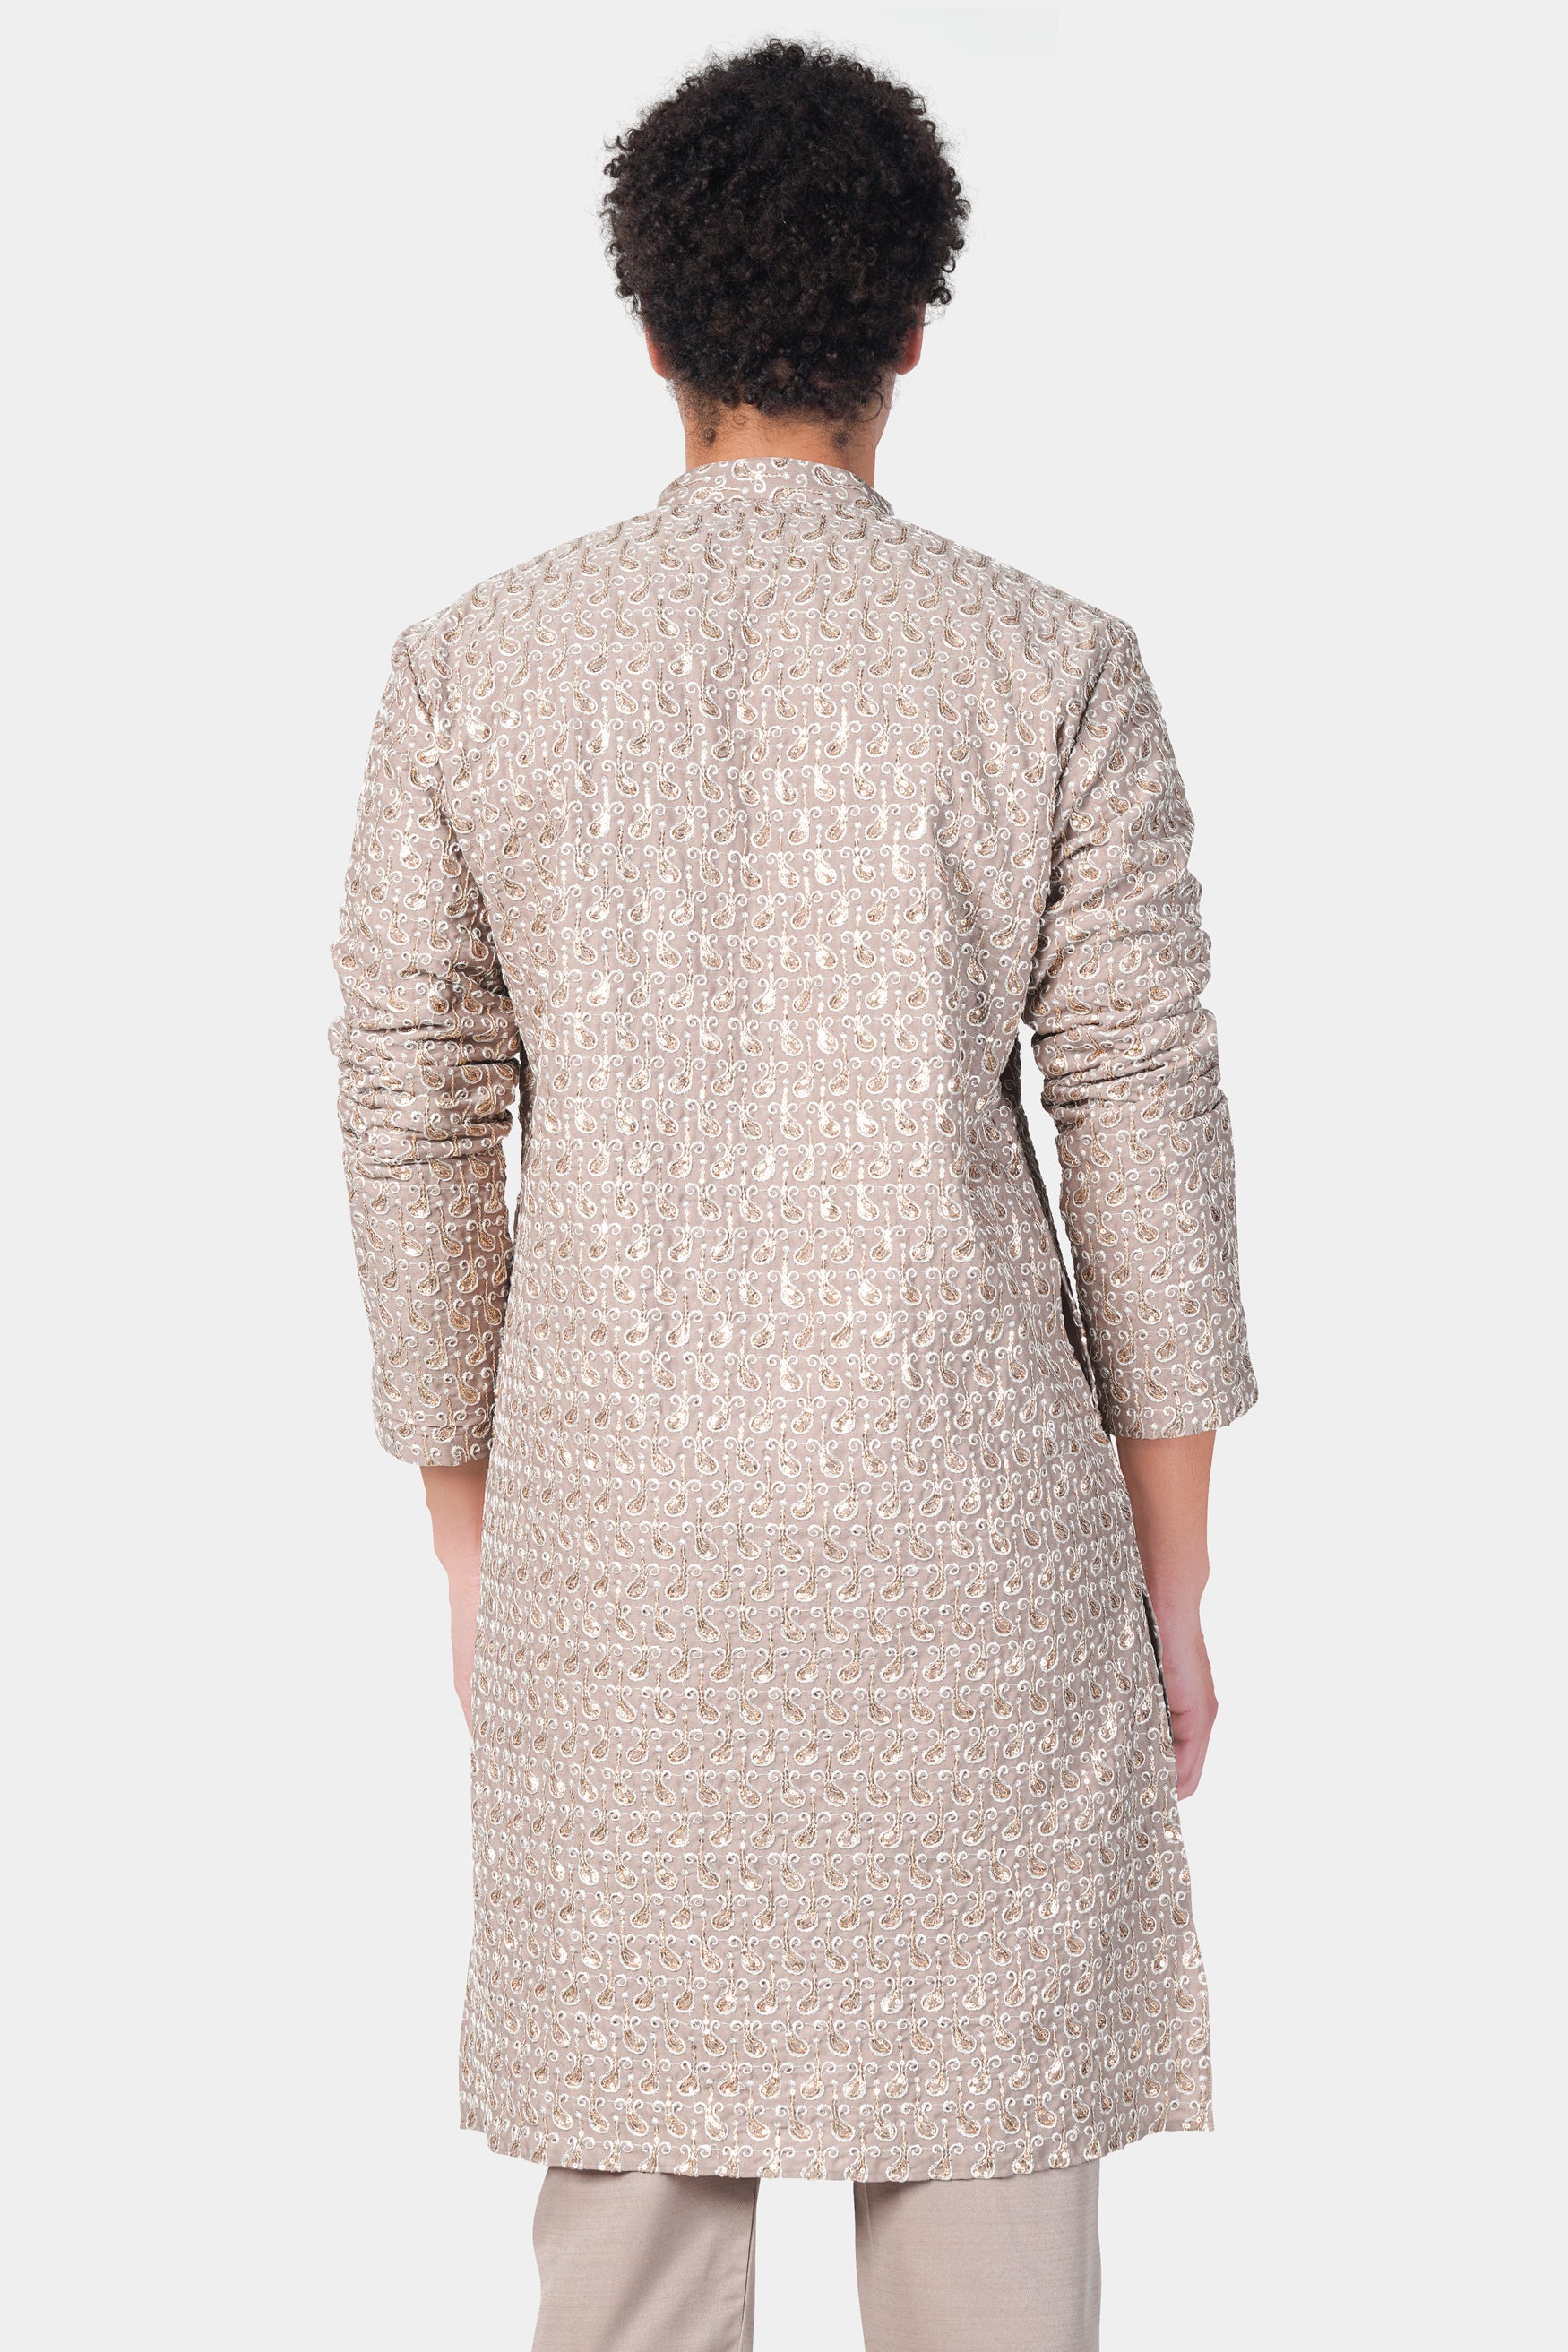 Foggy Brown Paisley Pattern Thread and Sequin Embroidered Subtle Sheen Viscose Designer Kurta